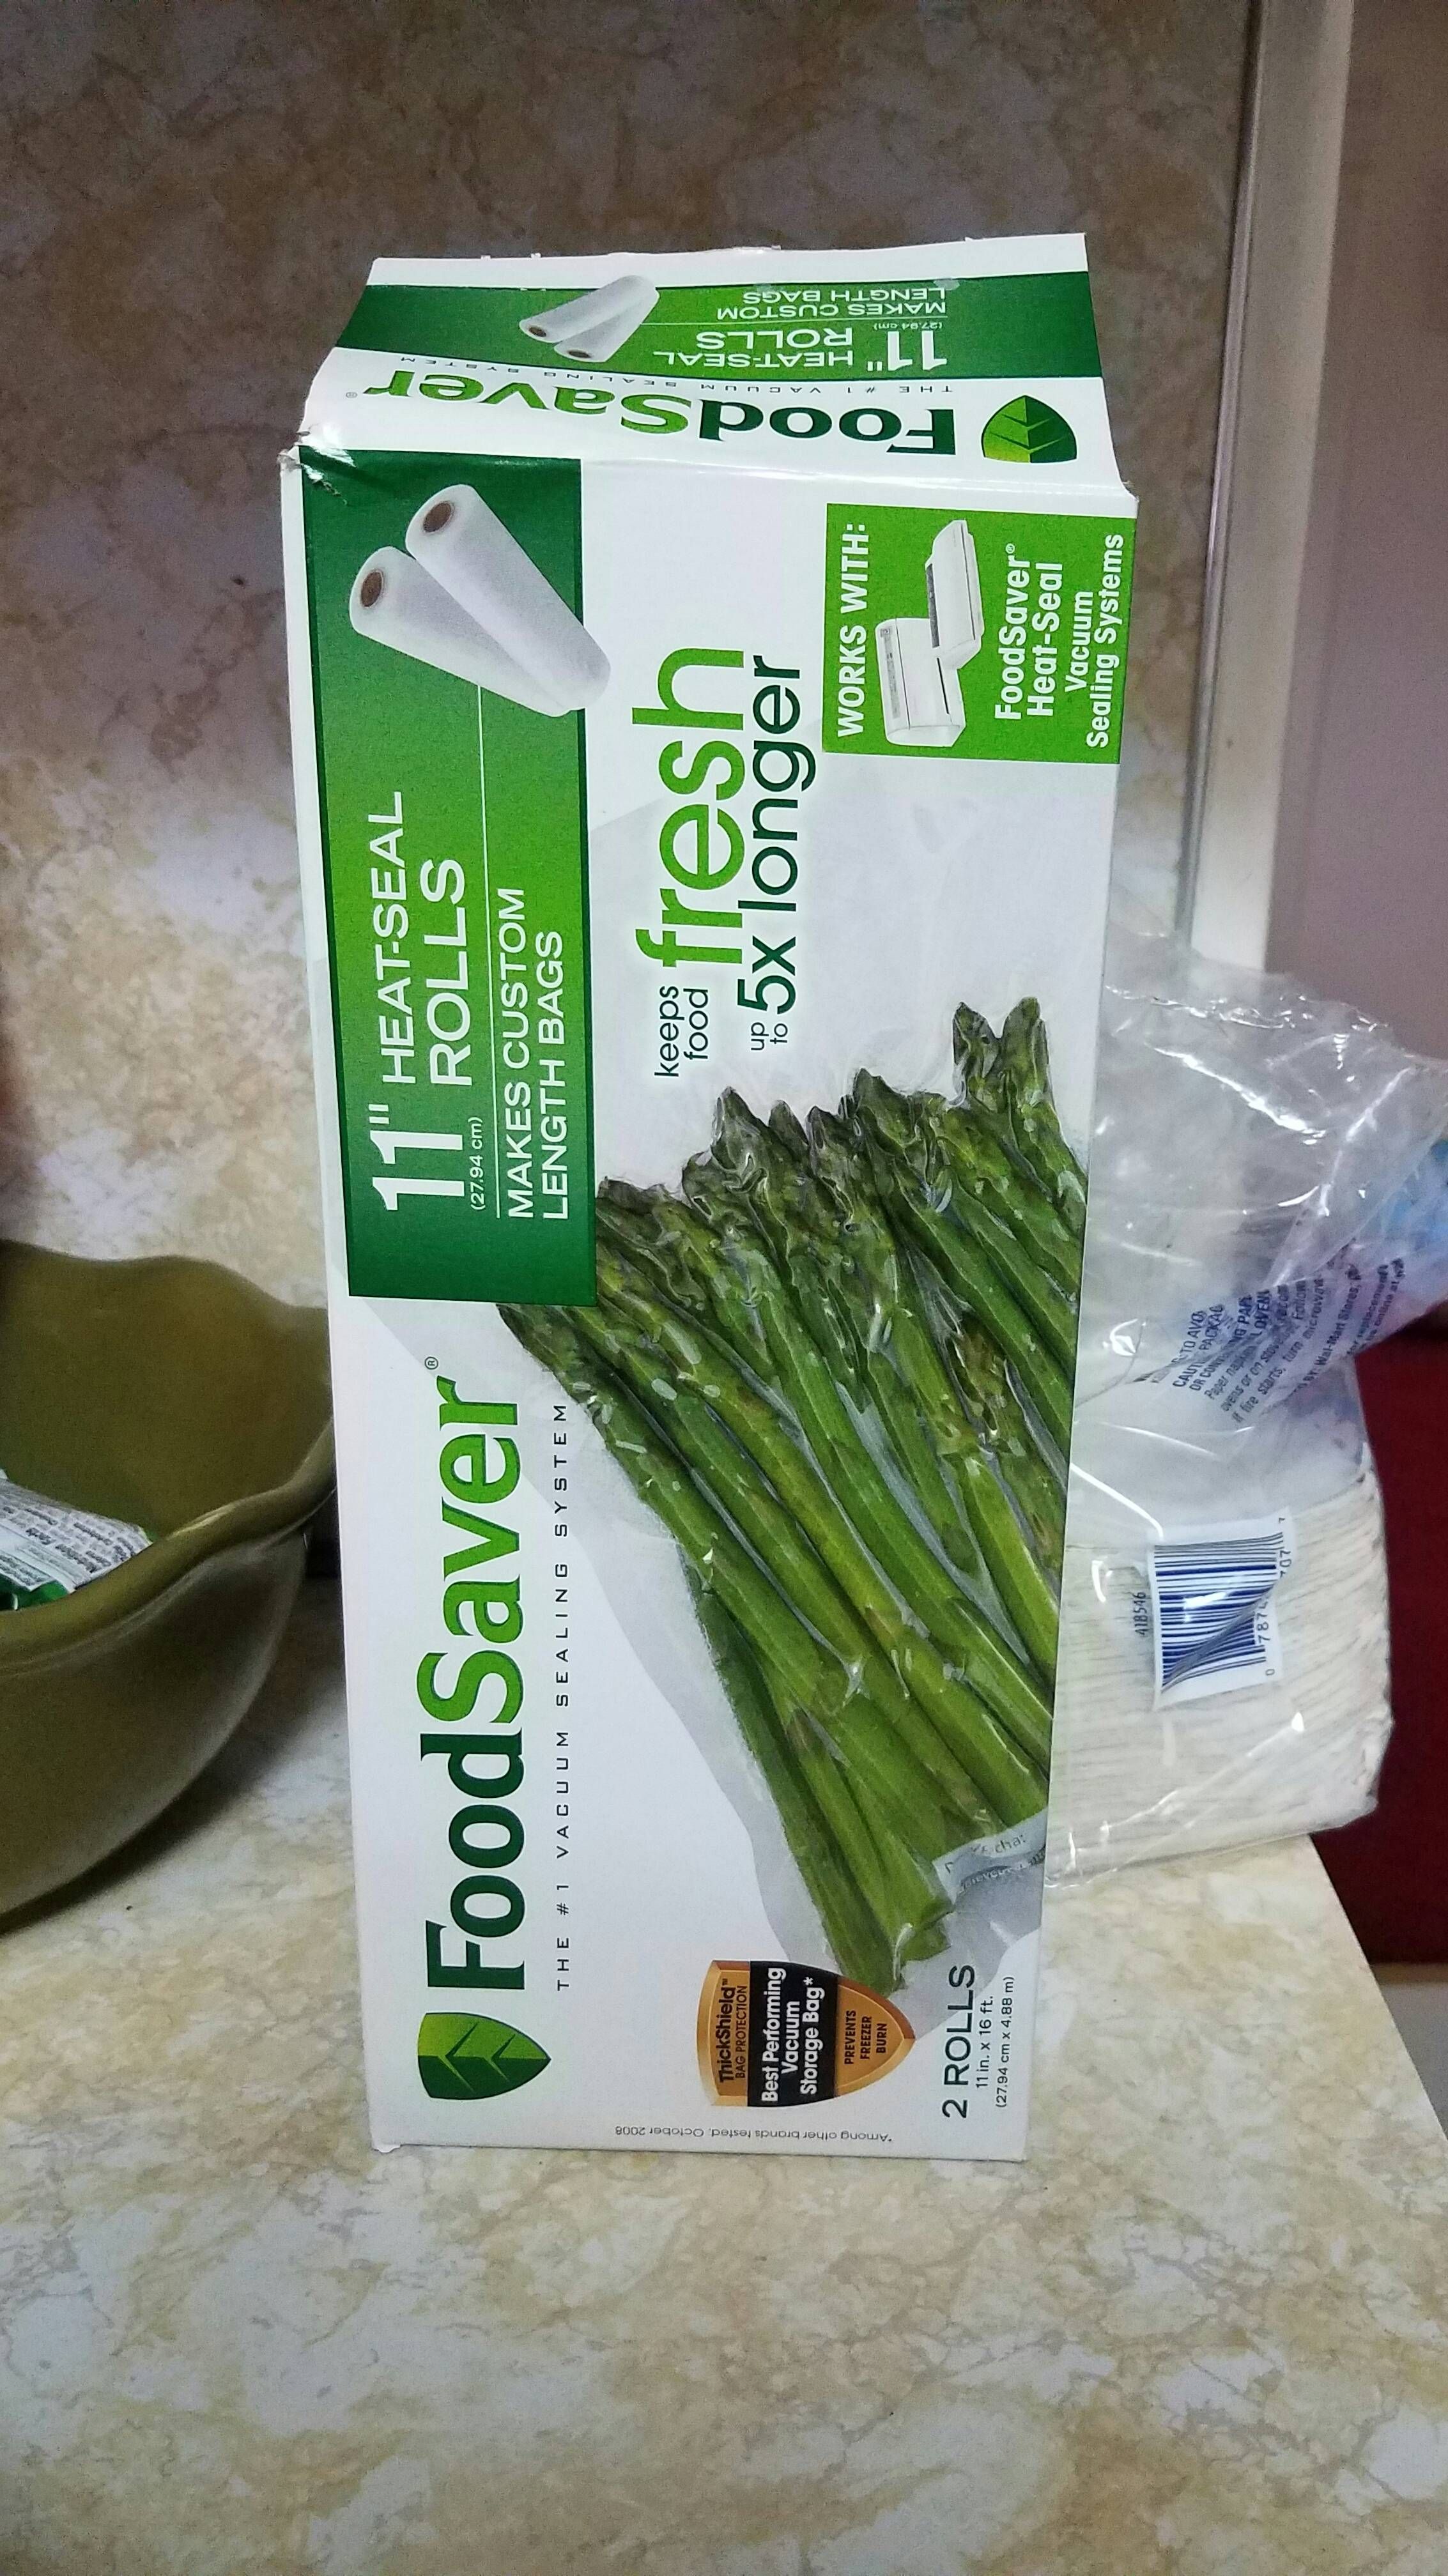 A lady at the store asked me how many asparagus came in a box, she had never seen it packaged that way before!